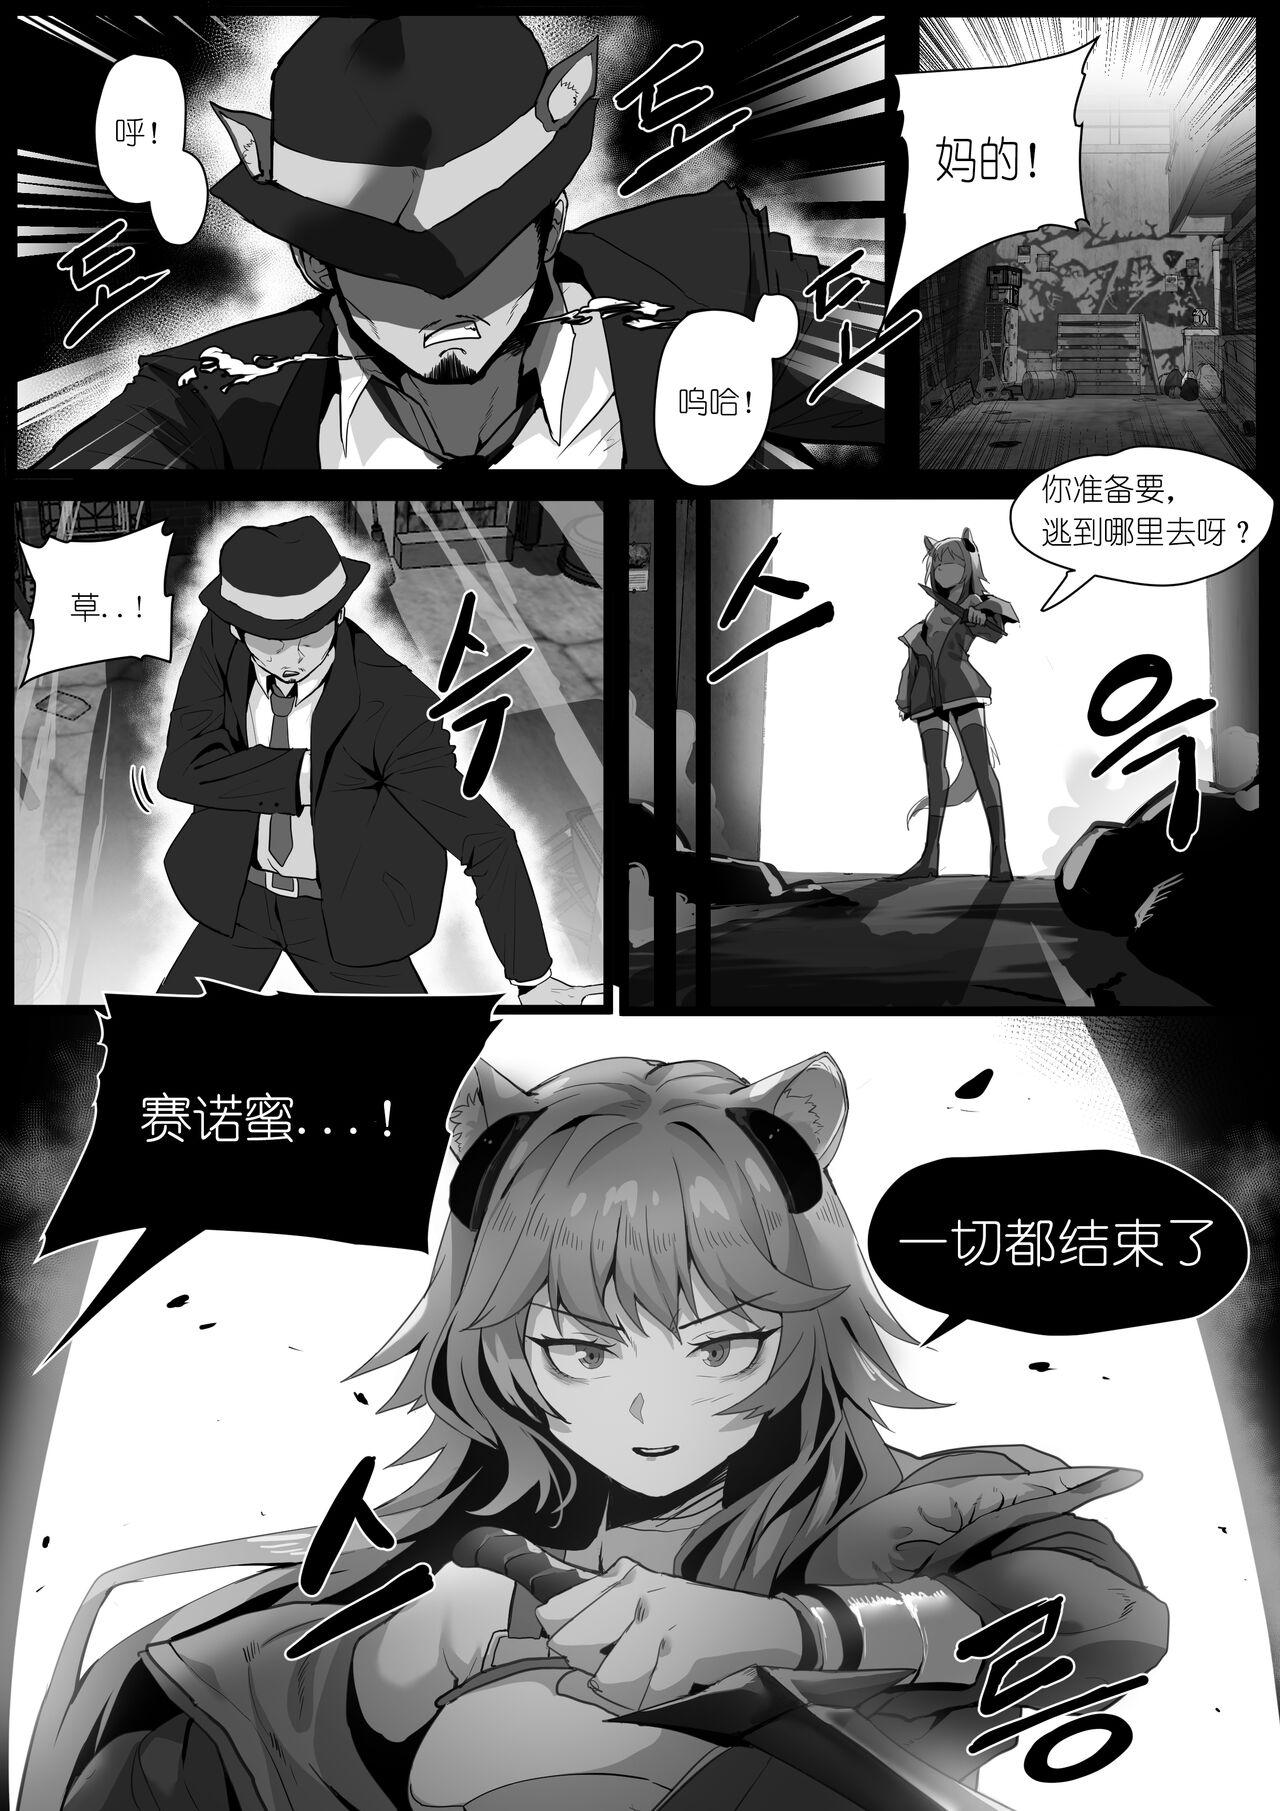 Pounded 欲望方舟记录3 - Arknights Lesbiansex - Page 8